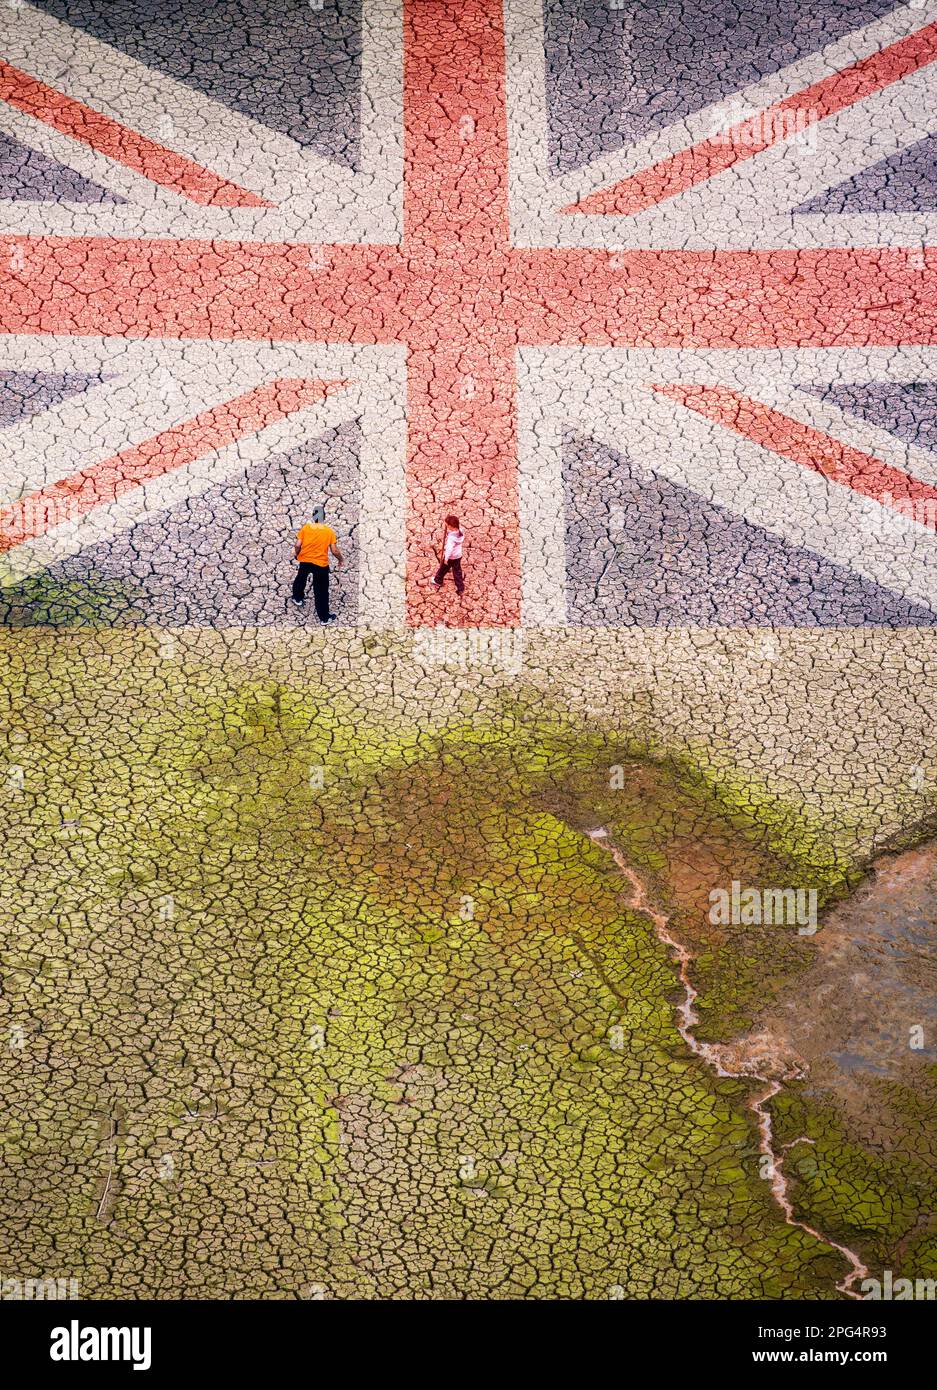 Man and young girl walking on cracked, dry lake bed. UK flag overlaid. Global warming, climate change, drought... UK concept. Stock Photo